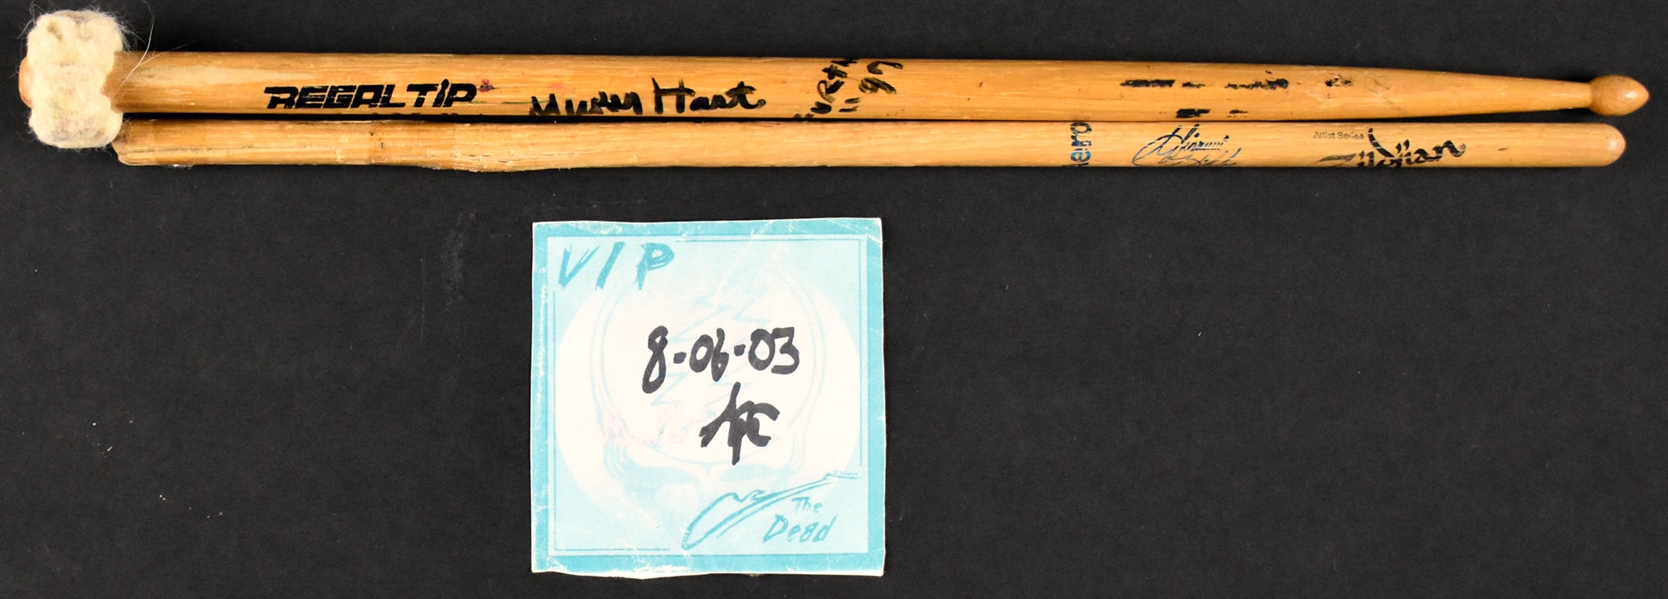 Mickey Hart (Grateful Dead) Stage-Used Cymbal Mallet Drumstick and Giovanni Hidalgo Stage-Used Drumstick